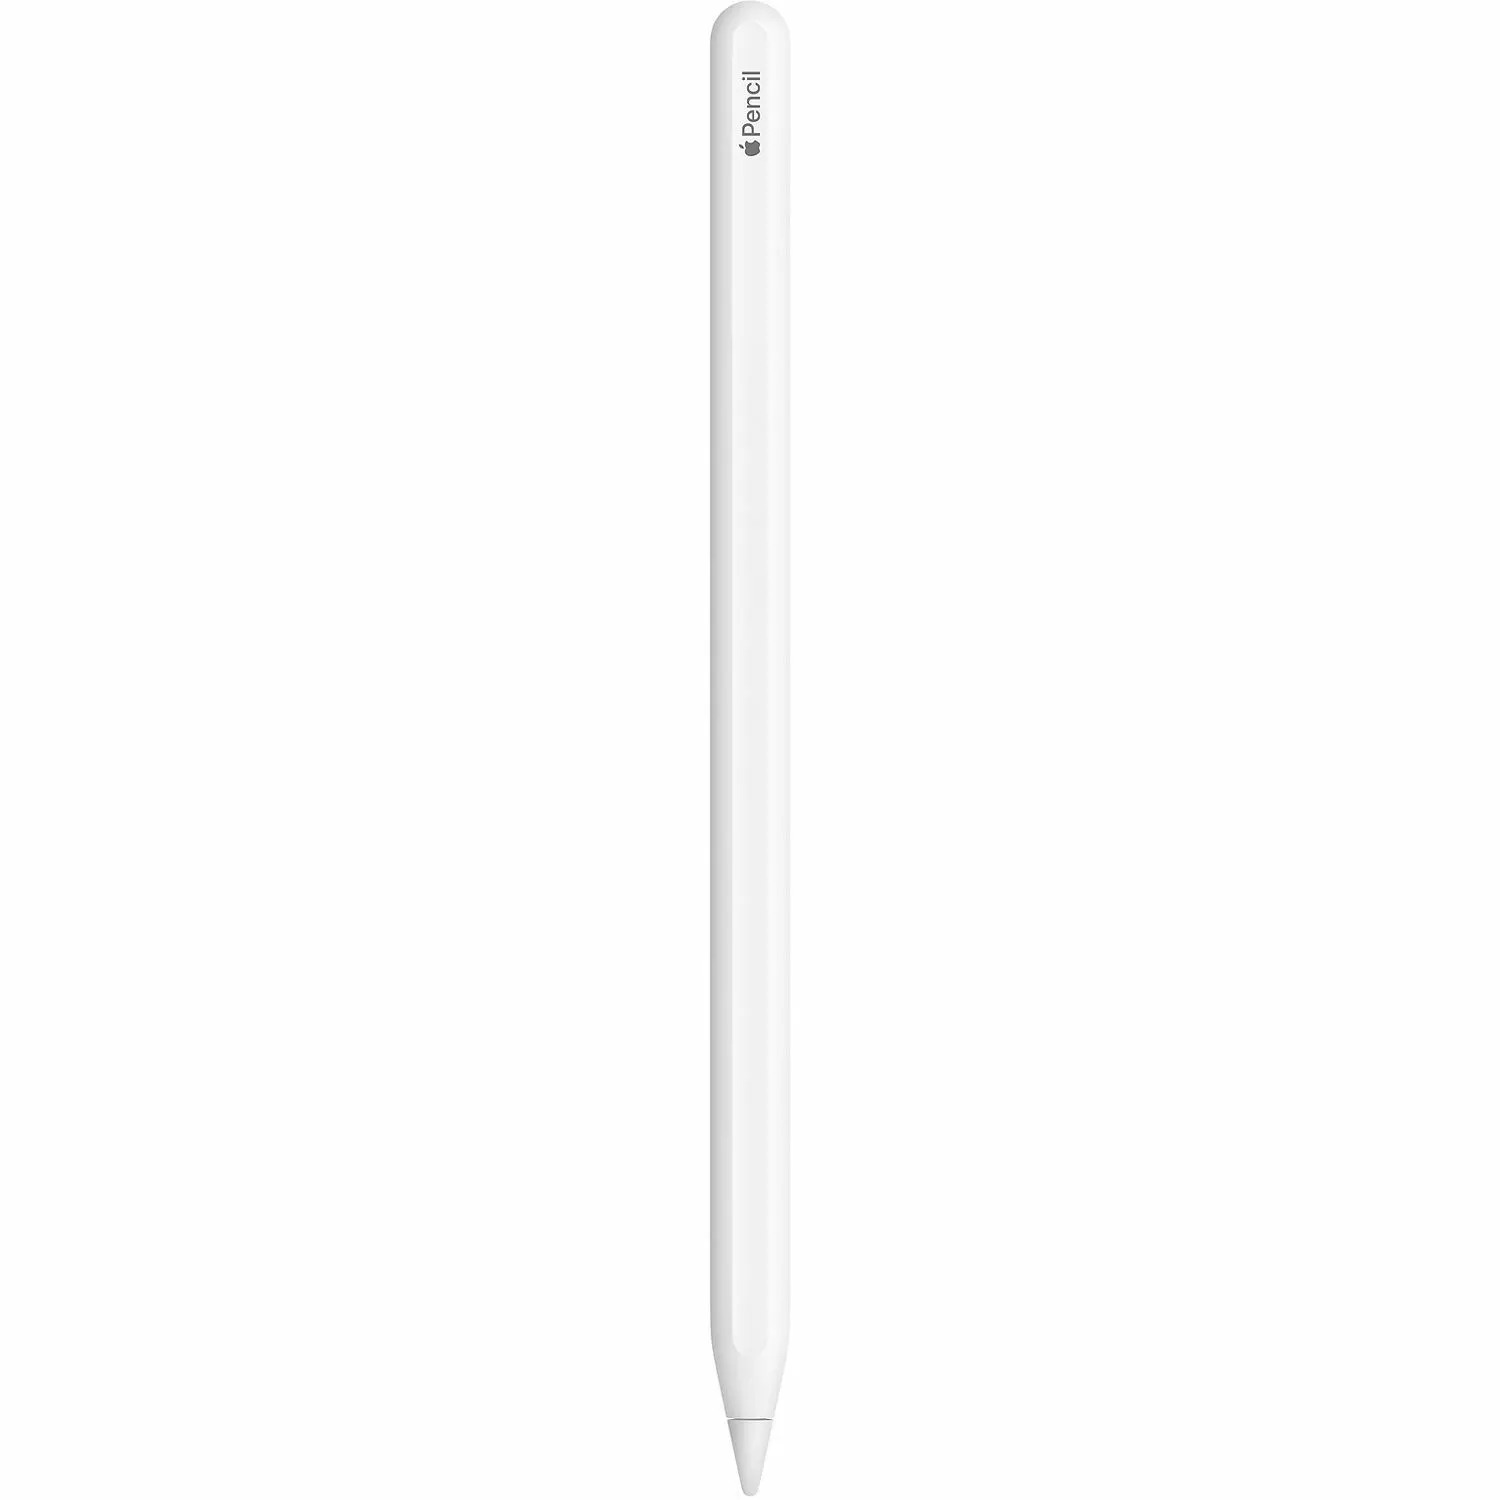 (Used) Apple Pencil (2nd Generation) $62.90 + Free Shipping